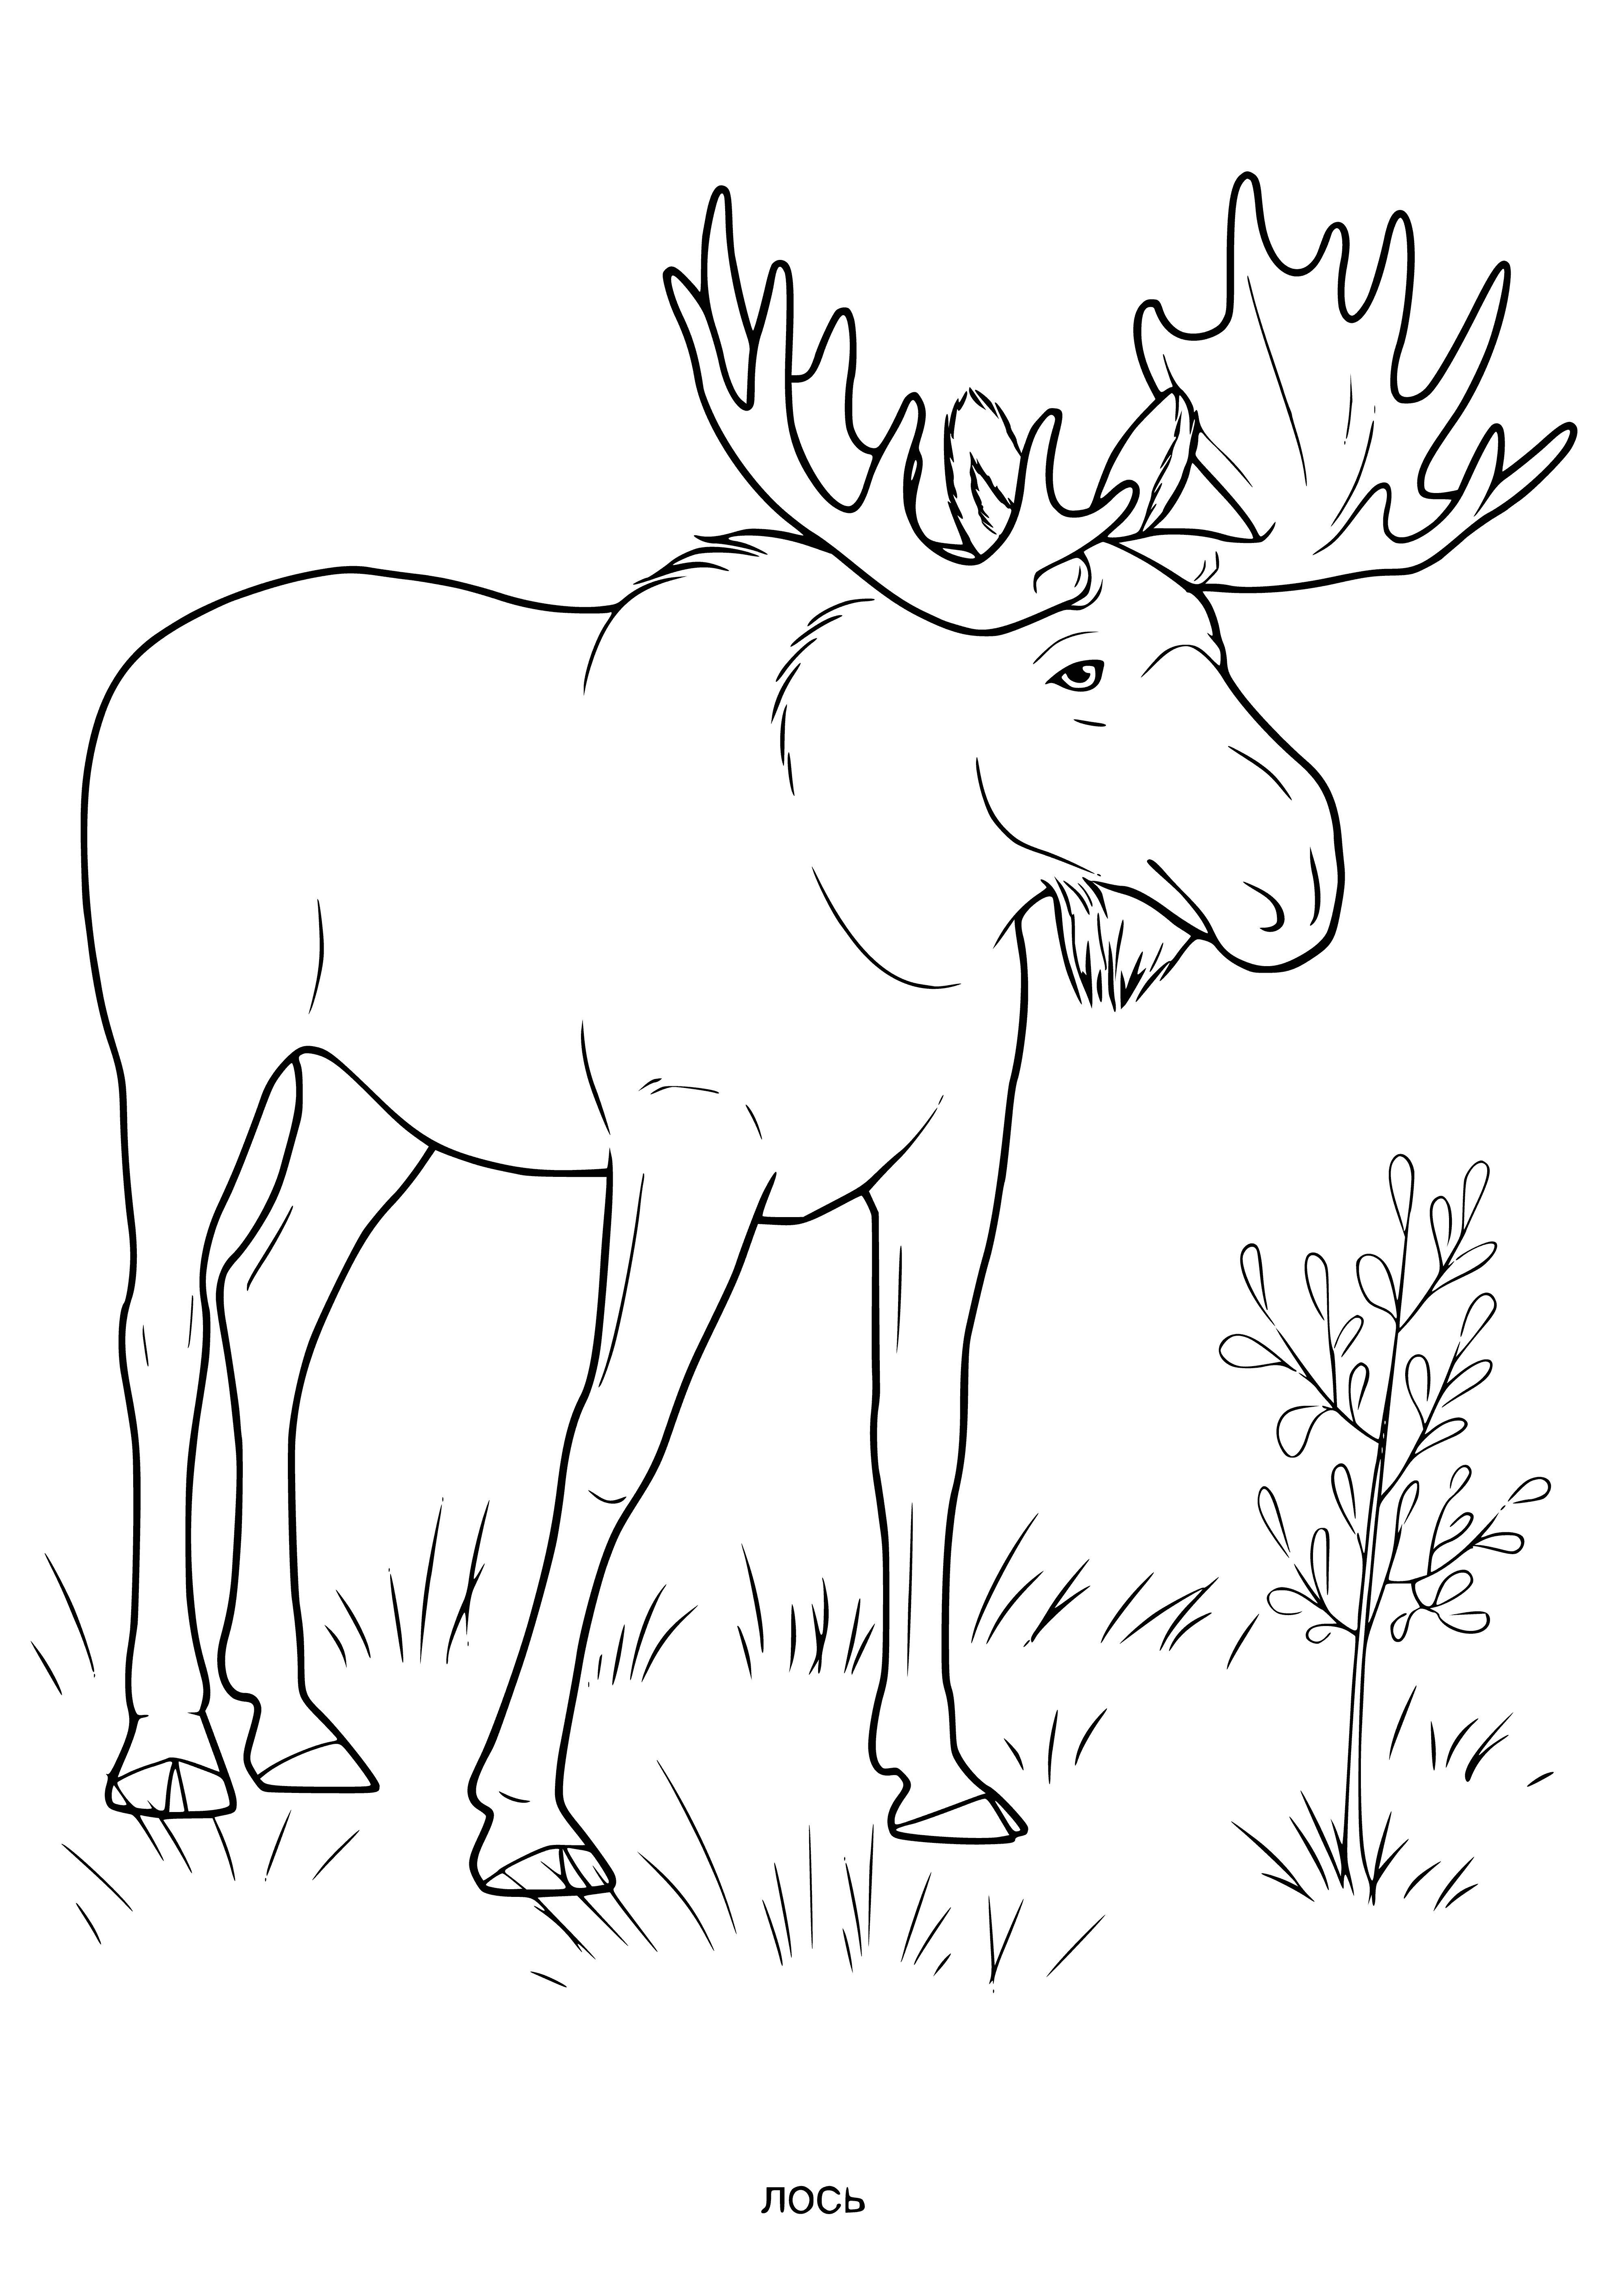 coloring page: Mammal stands with antlers in field of tall grass & trees.